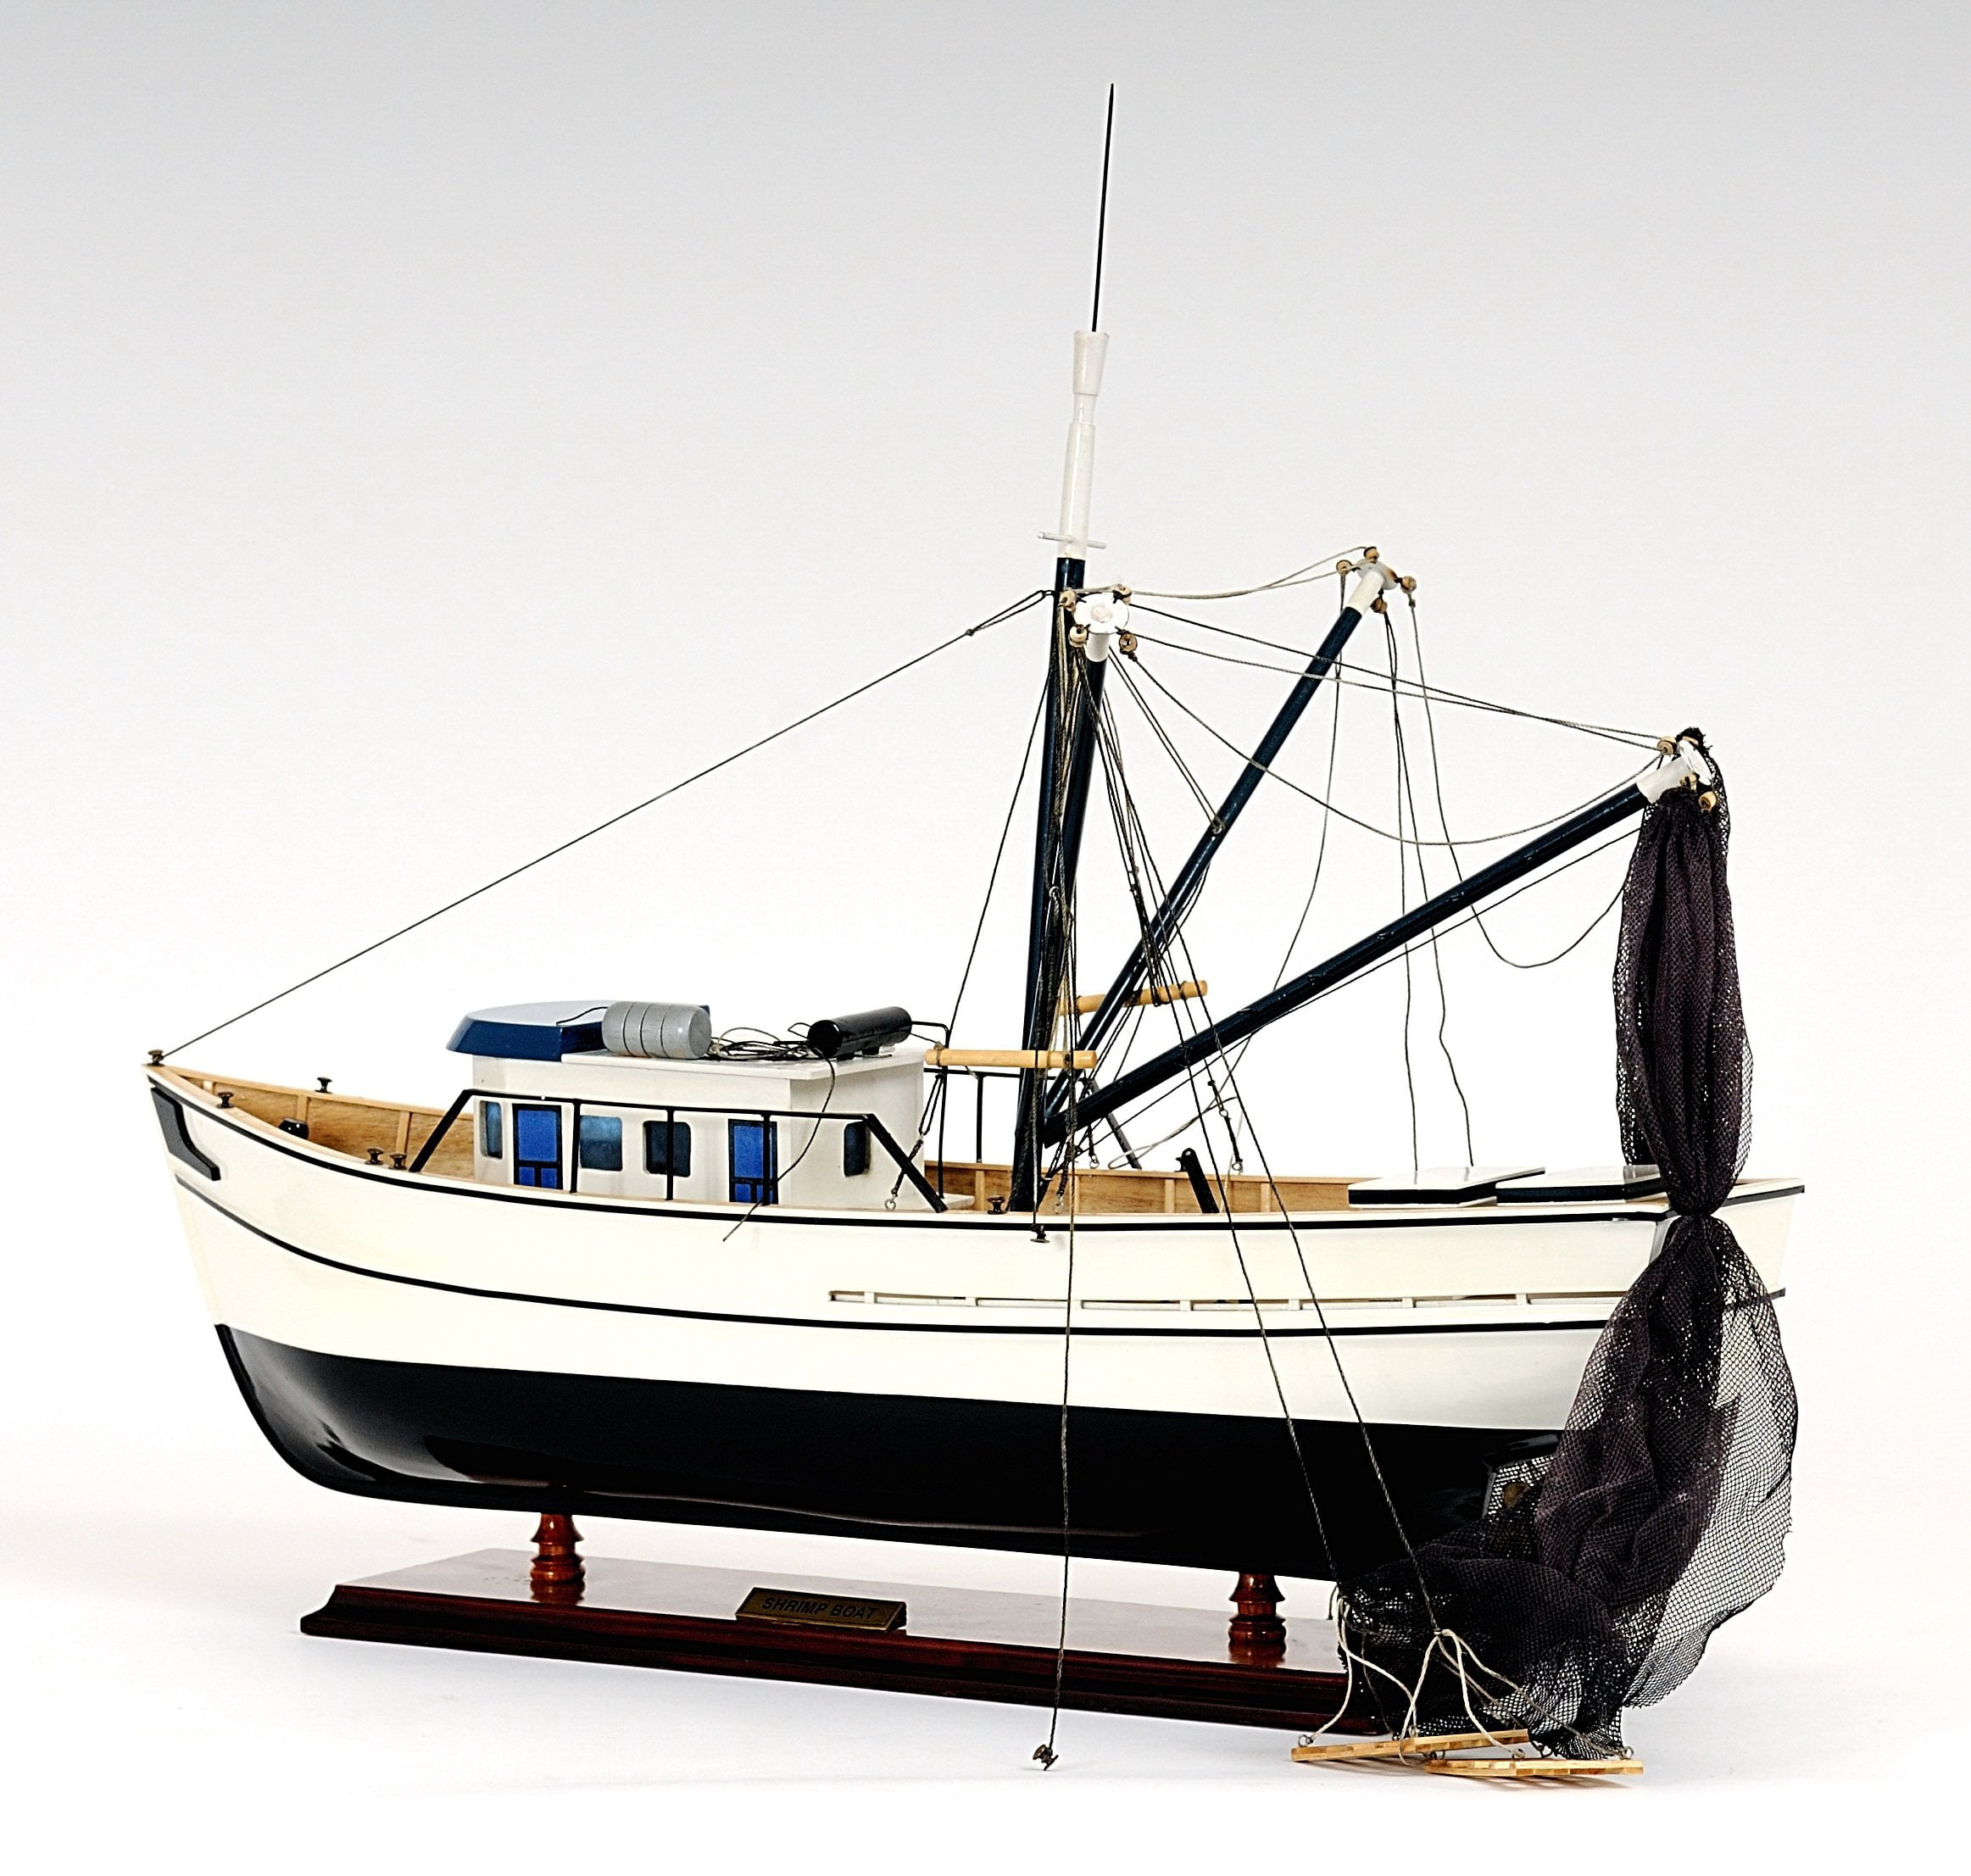 maritime Ship Large Blue Trawler Wooden Model Fishing Boat With Nets On Stand 